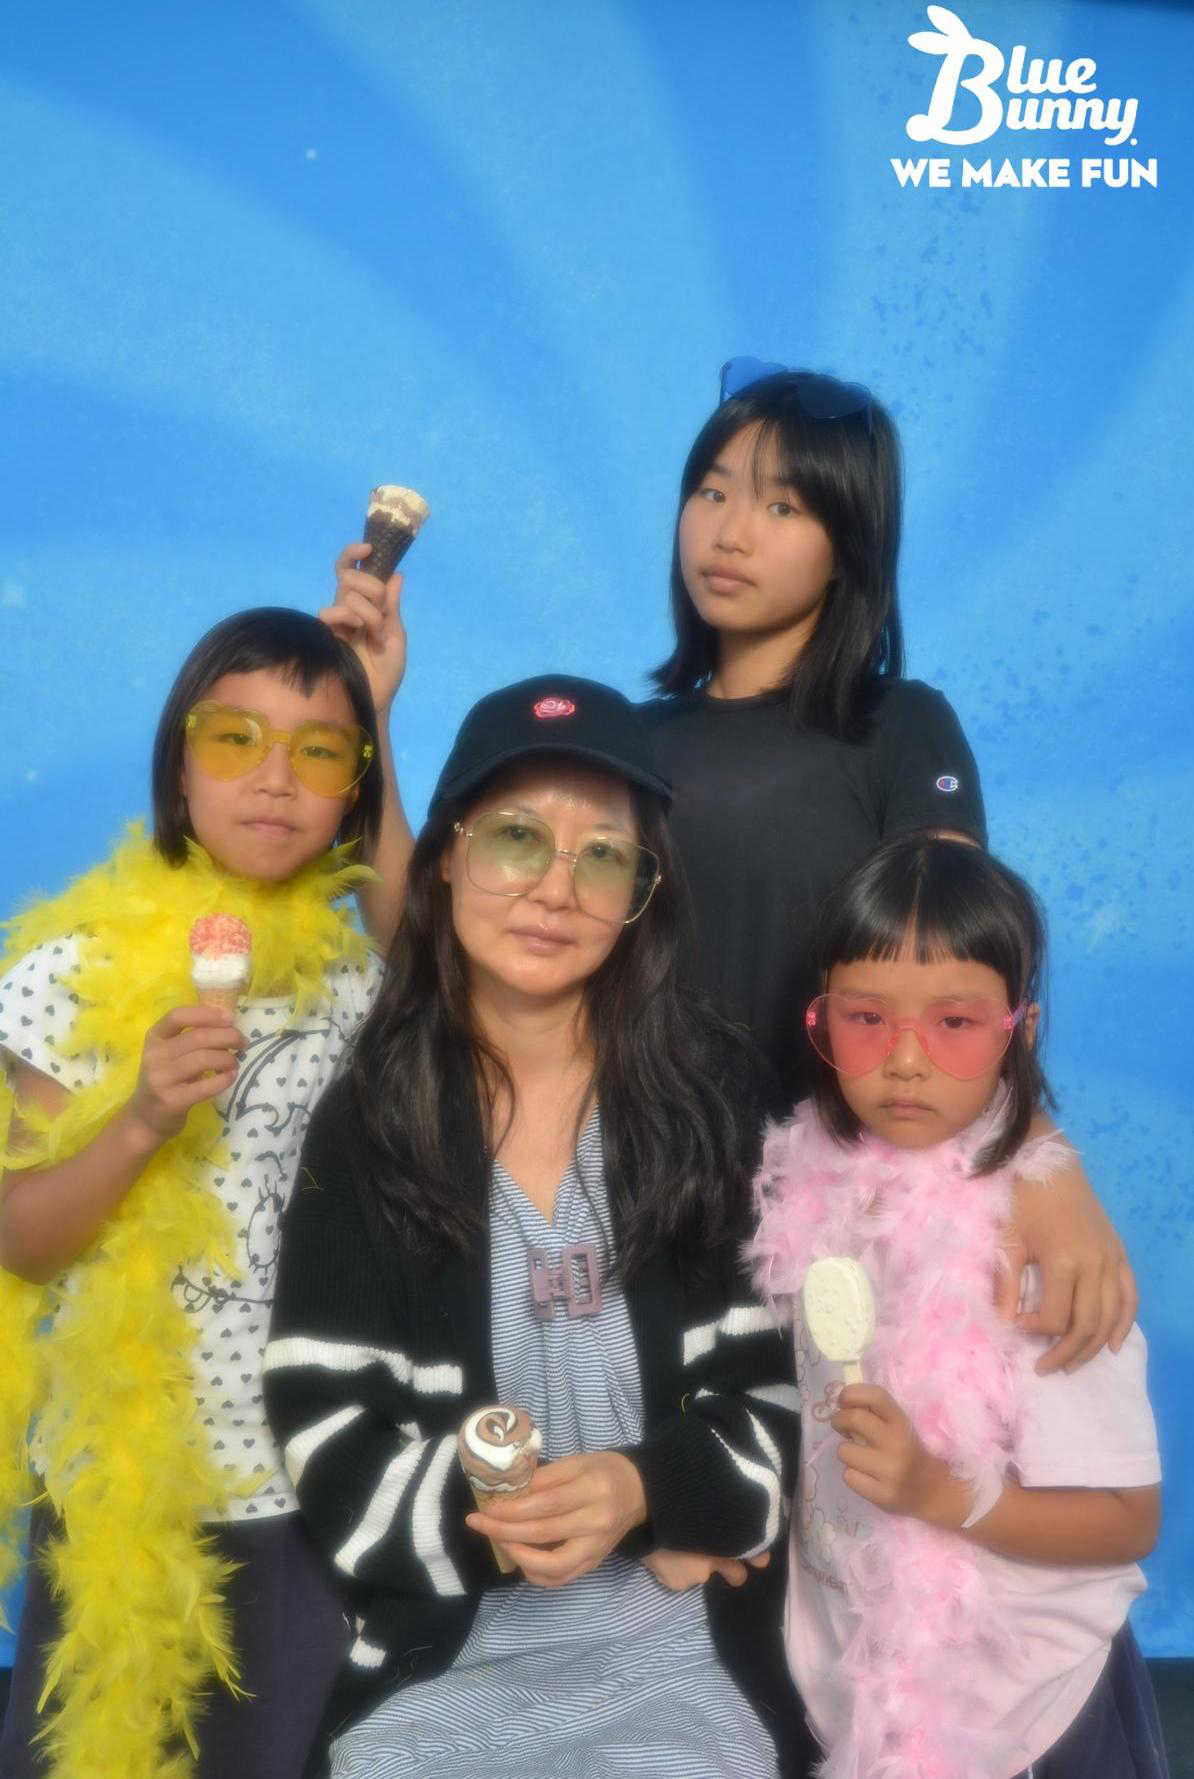 Mom with 3 daughters giving the camera serious looks while holding Blue Bunny Novelties